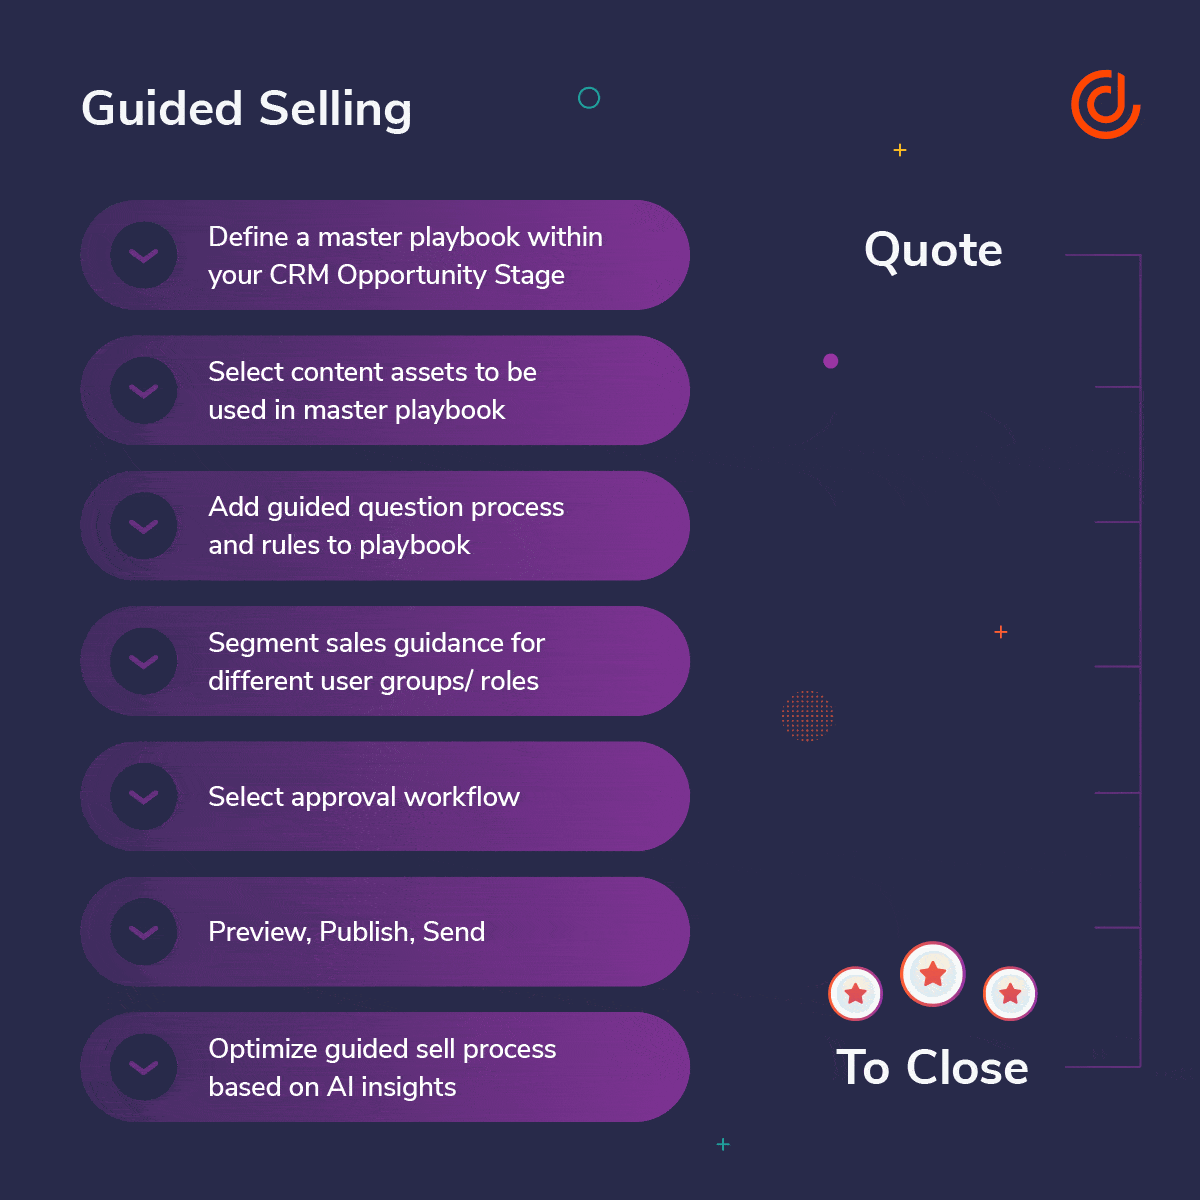 how guided selling works